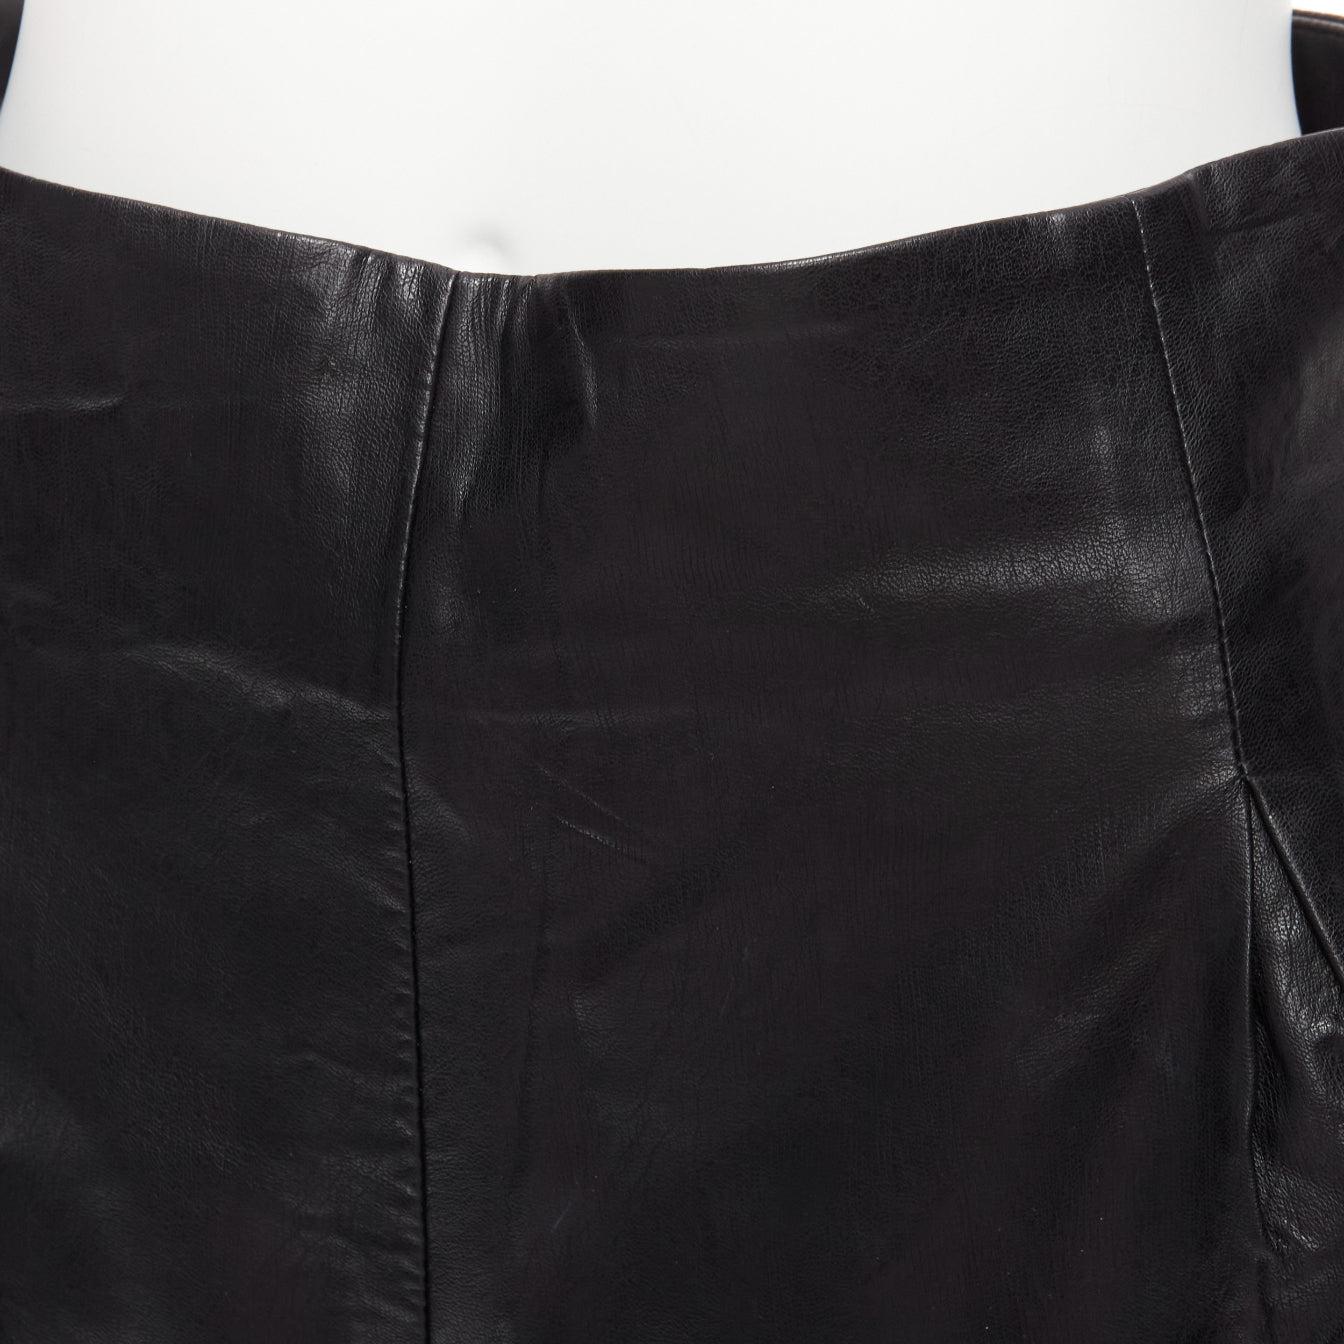 BRONX & BANCO black faux leather high waist paperbag waist flared shorts S For Sale 3